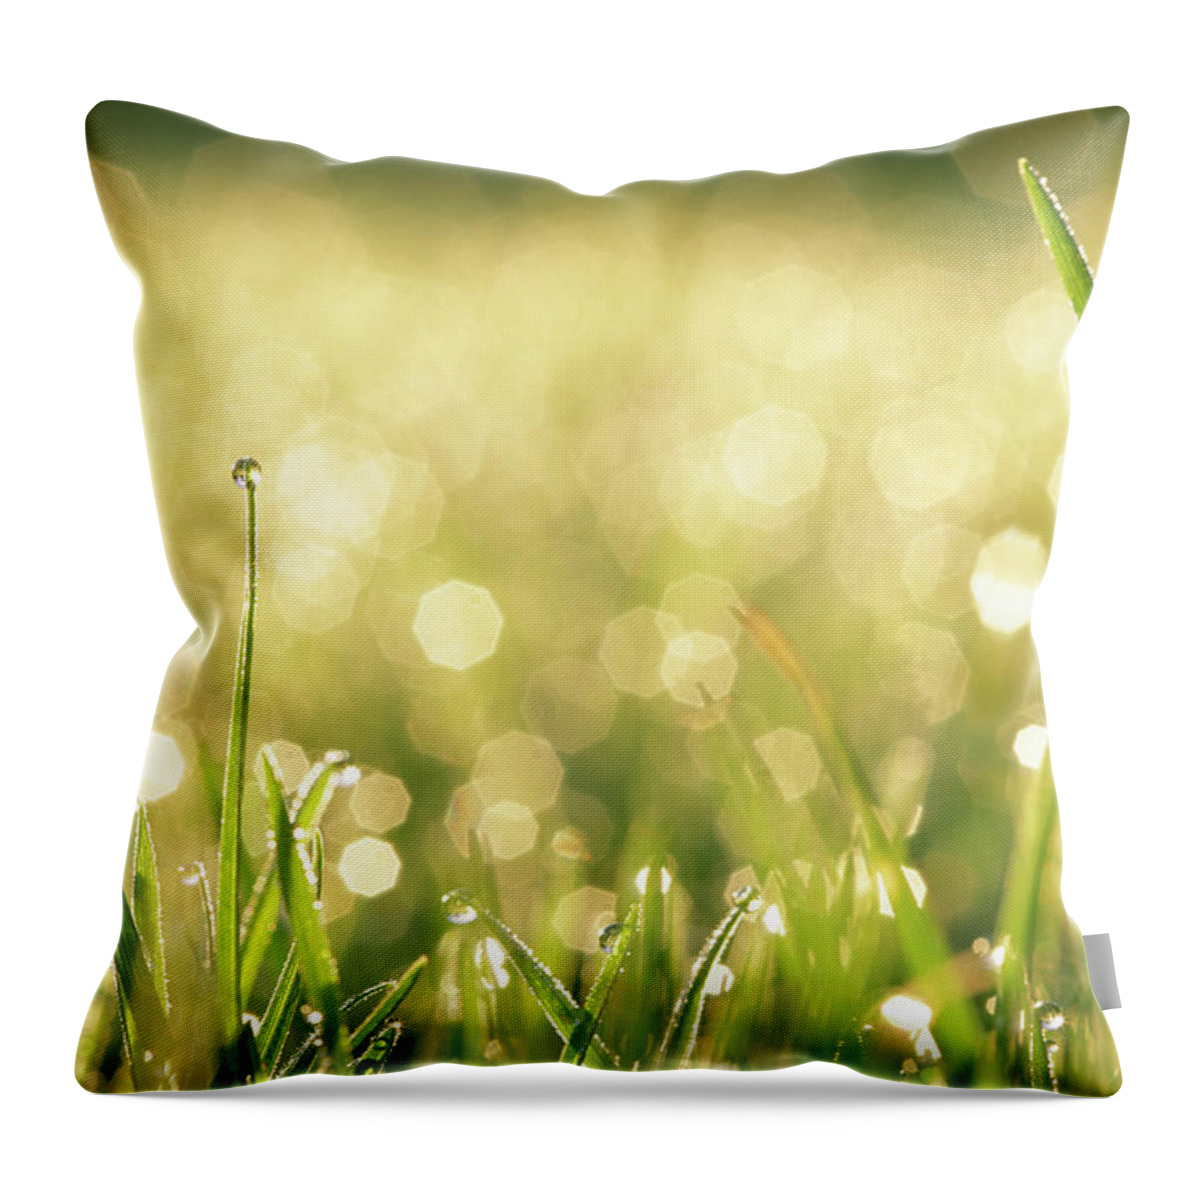 Grass Throw Pillow featuring the photograph Grass With Water Drops by Peter Cade